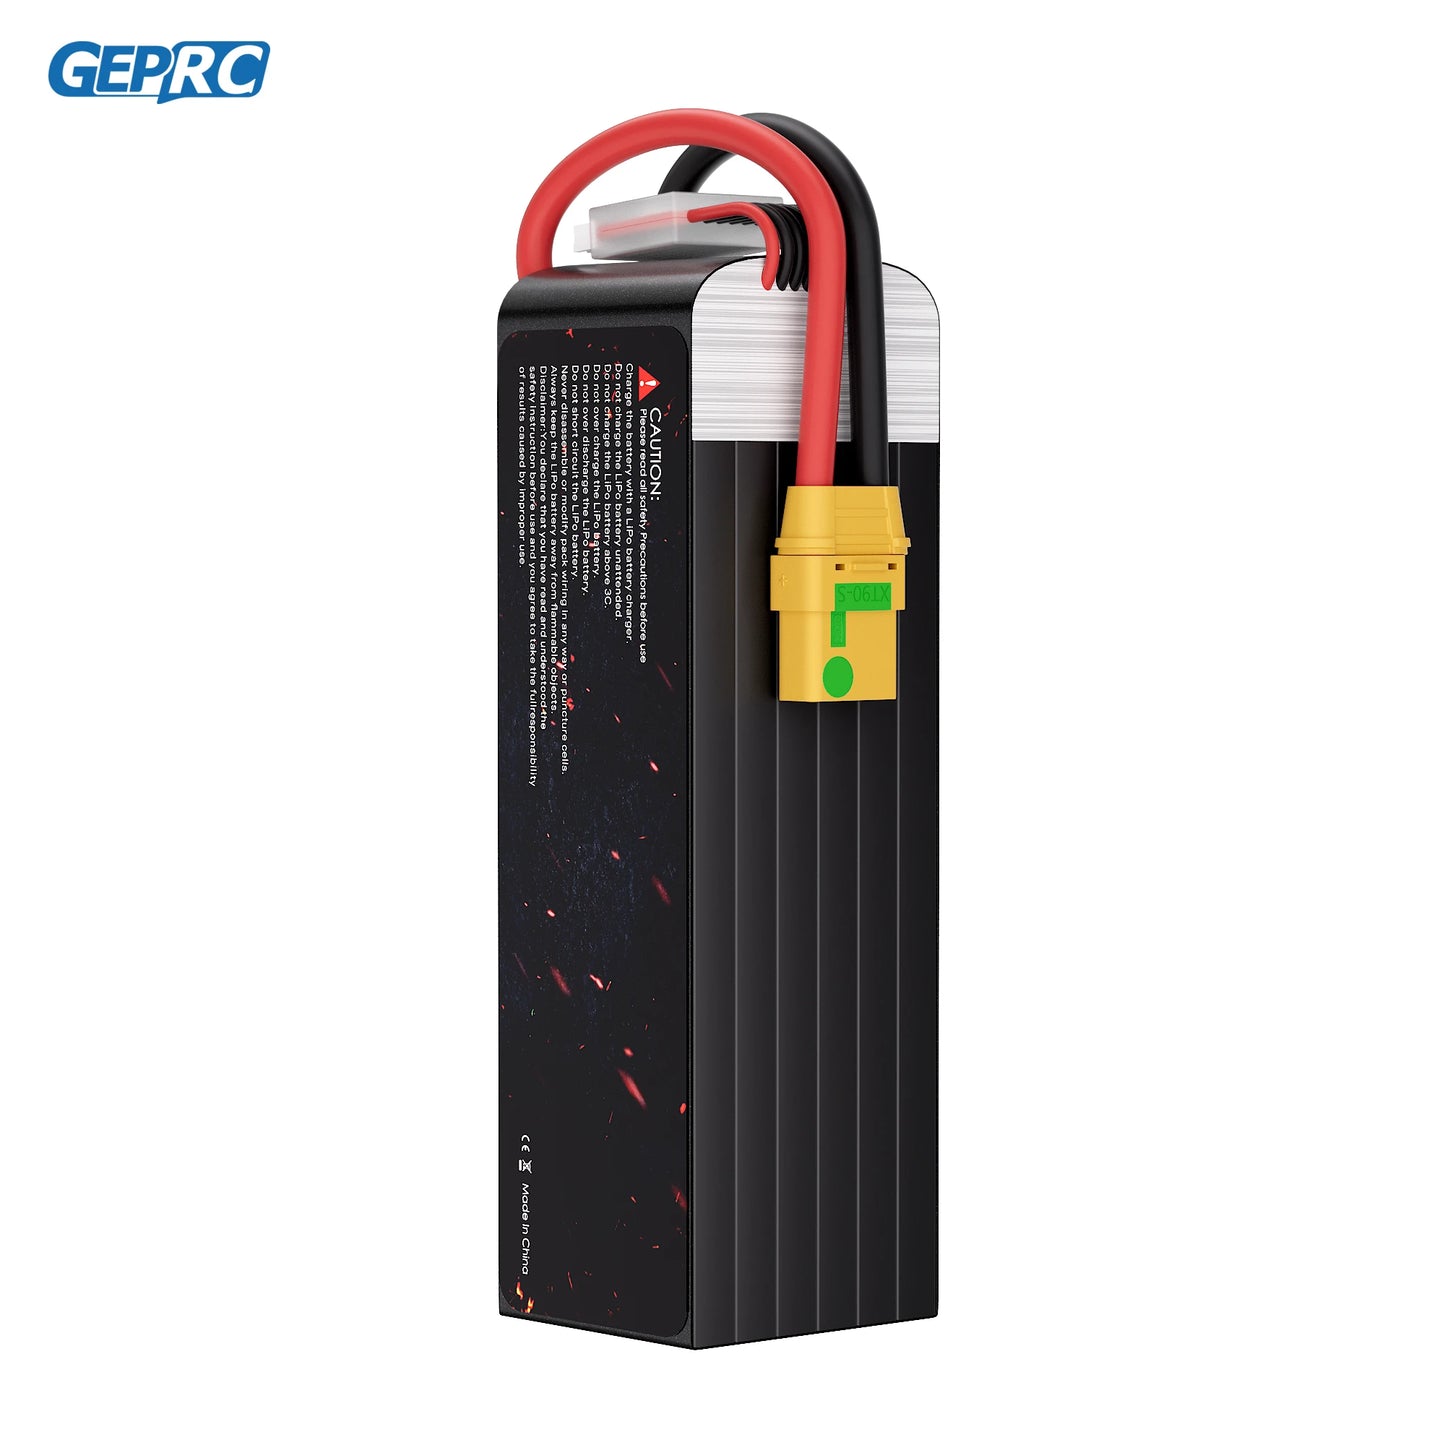 GEPRC Storm 6S 5000mAh 95C Lipo Battery - for 3-5Inch Series Drone RC FPV Quadcopter Freestyle Drone Accessories Parts